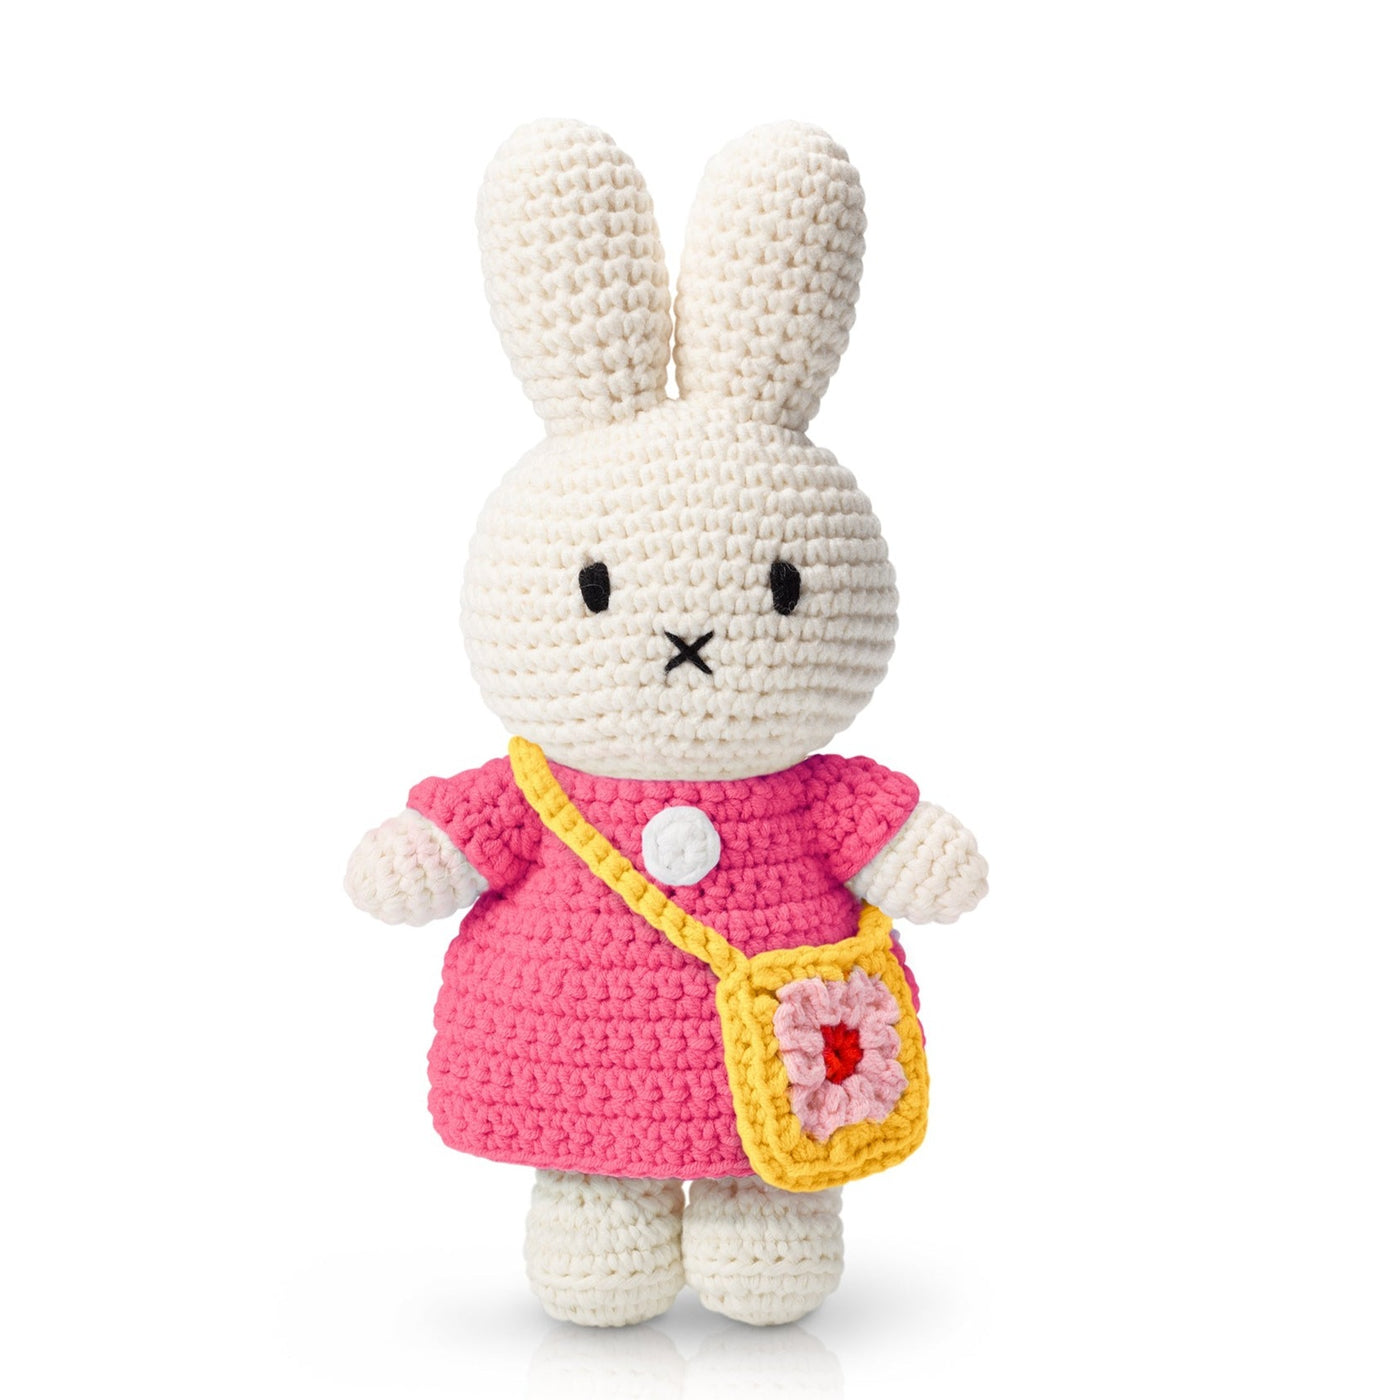 Crocheted Miffy in Pink Dress with Yellow Flower Bag